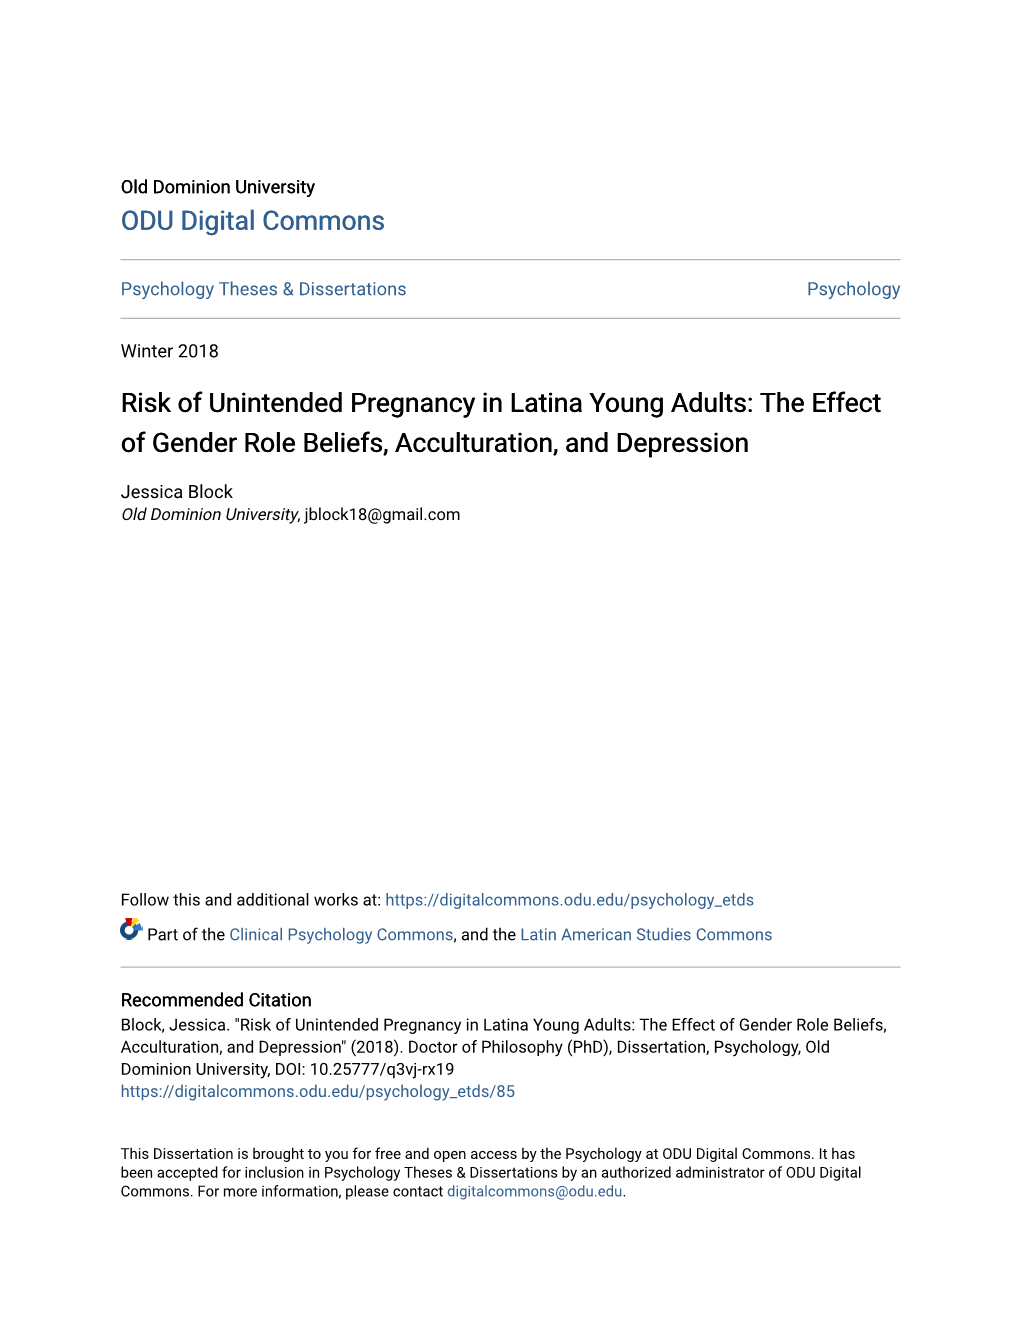 Risk of Unintended Pregnancy in Latina Young Adults: the Effect of Gender Role Beliefs, Acculturation, and Depression